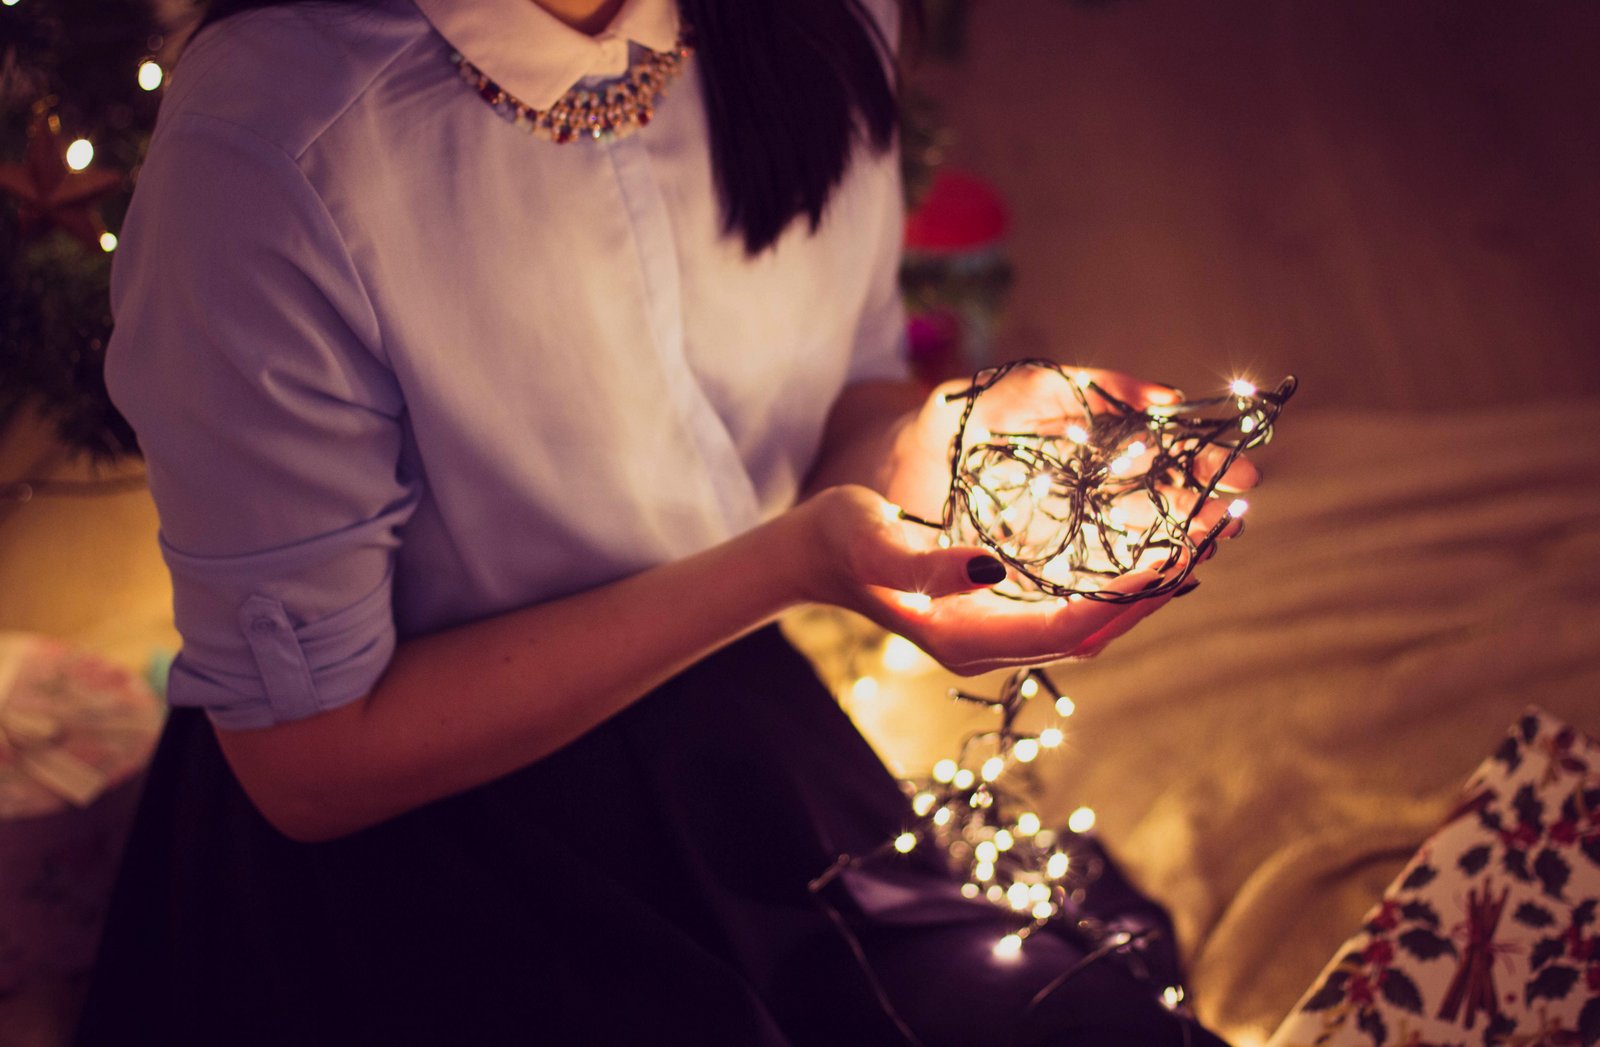 woman sitting, holding white holiday lights in her cupped hands